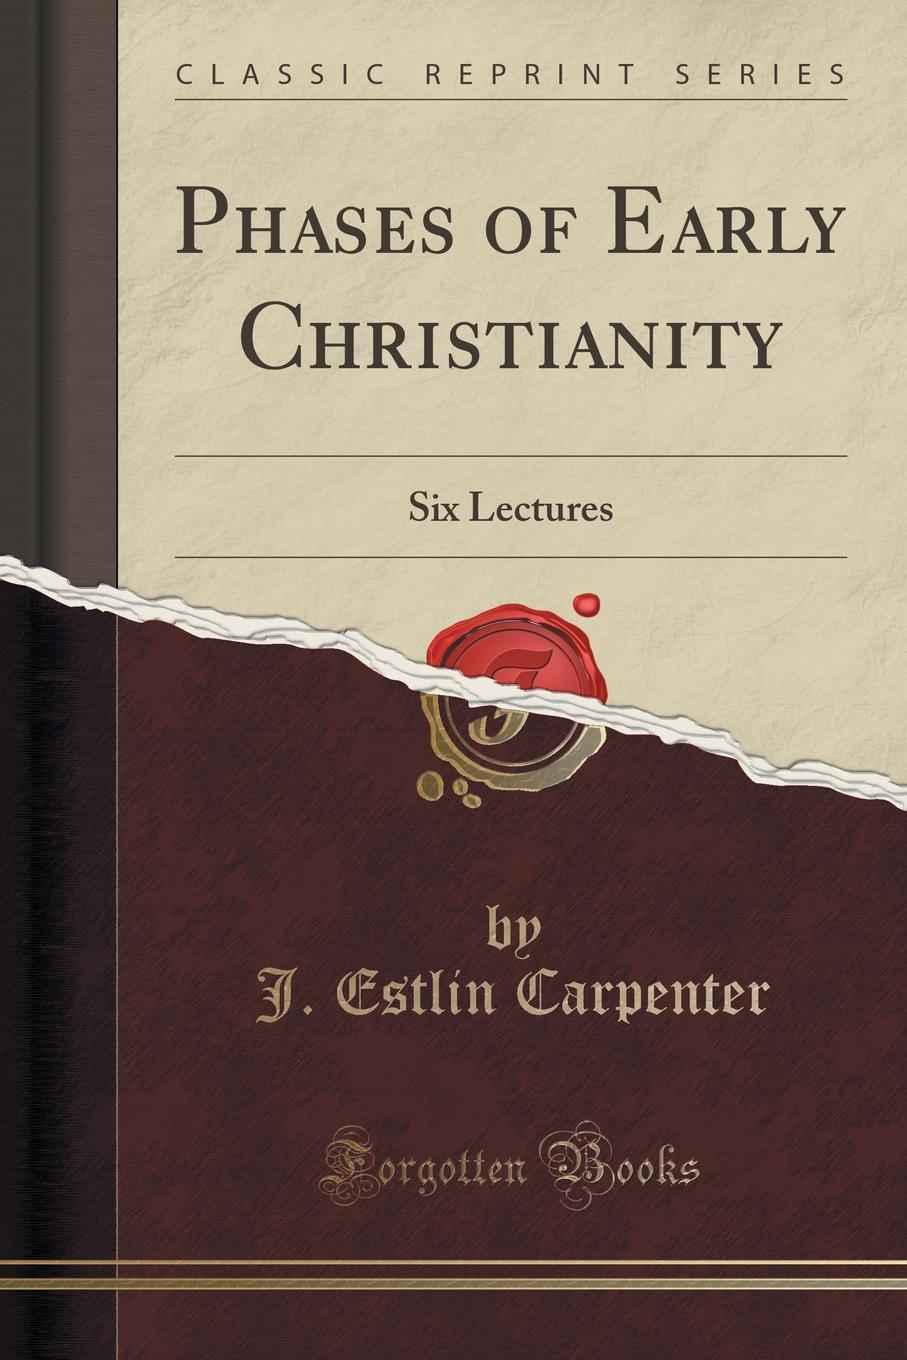 Buy Phases Of Early Christianity Online ₹1143 From Shopclues 6294